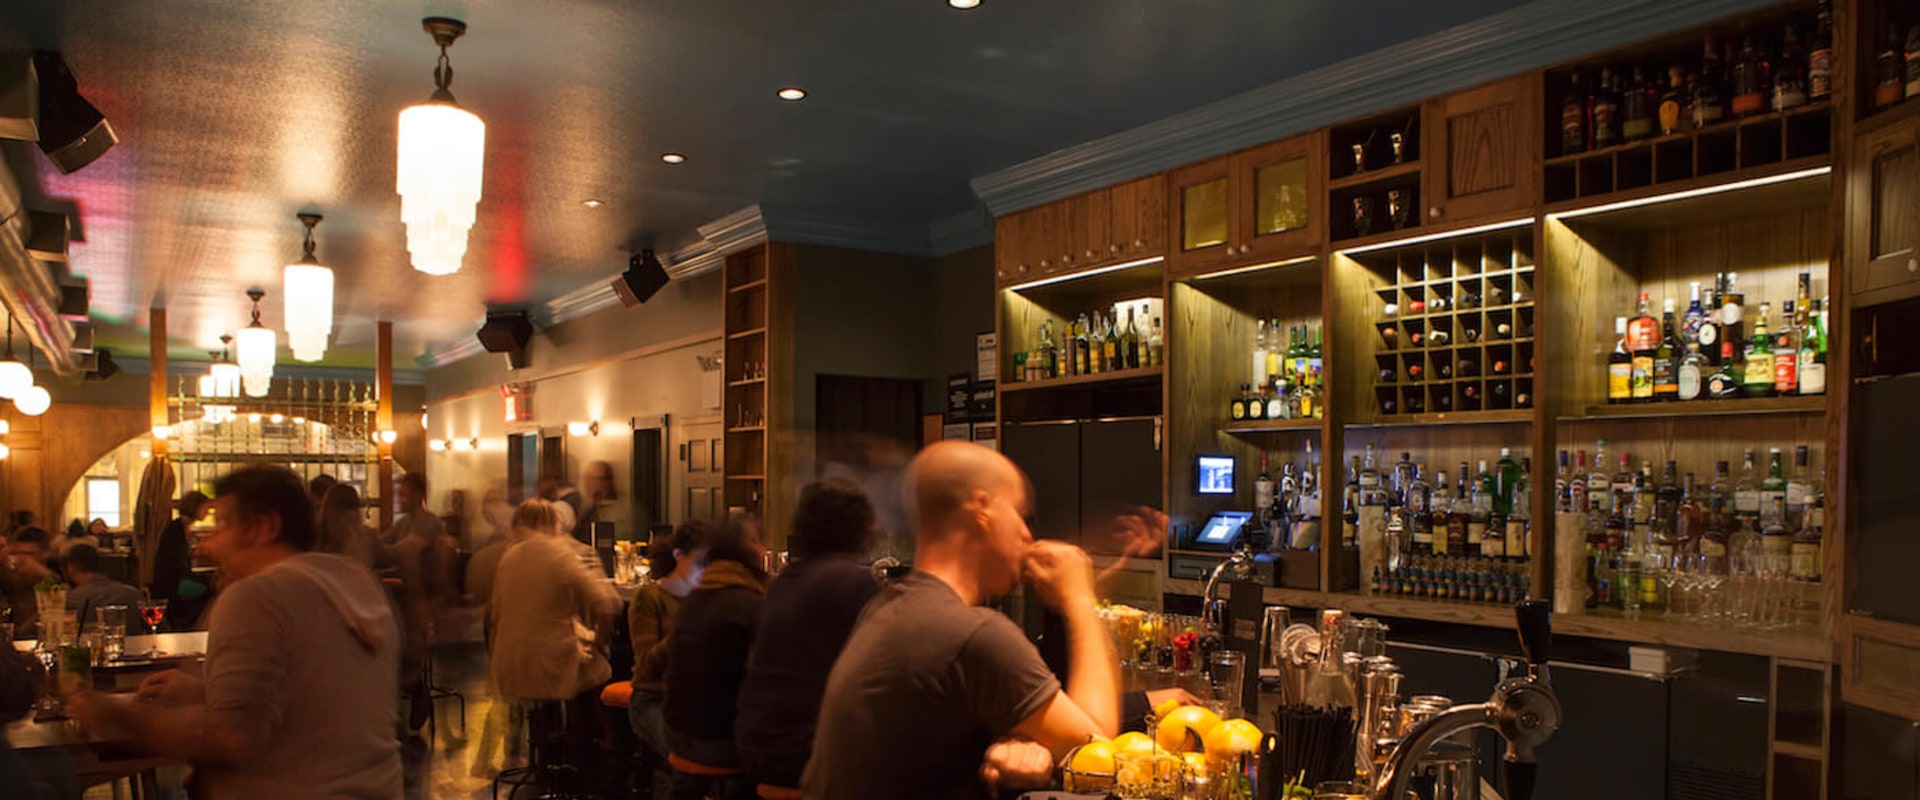 Creating an Inviting Atmosphere for Customers: A Bartender's Guide